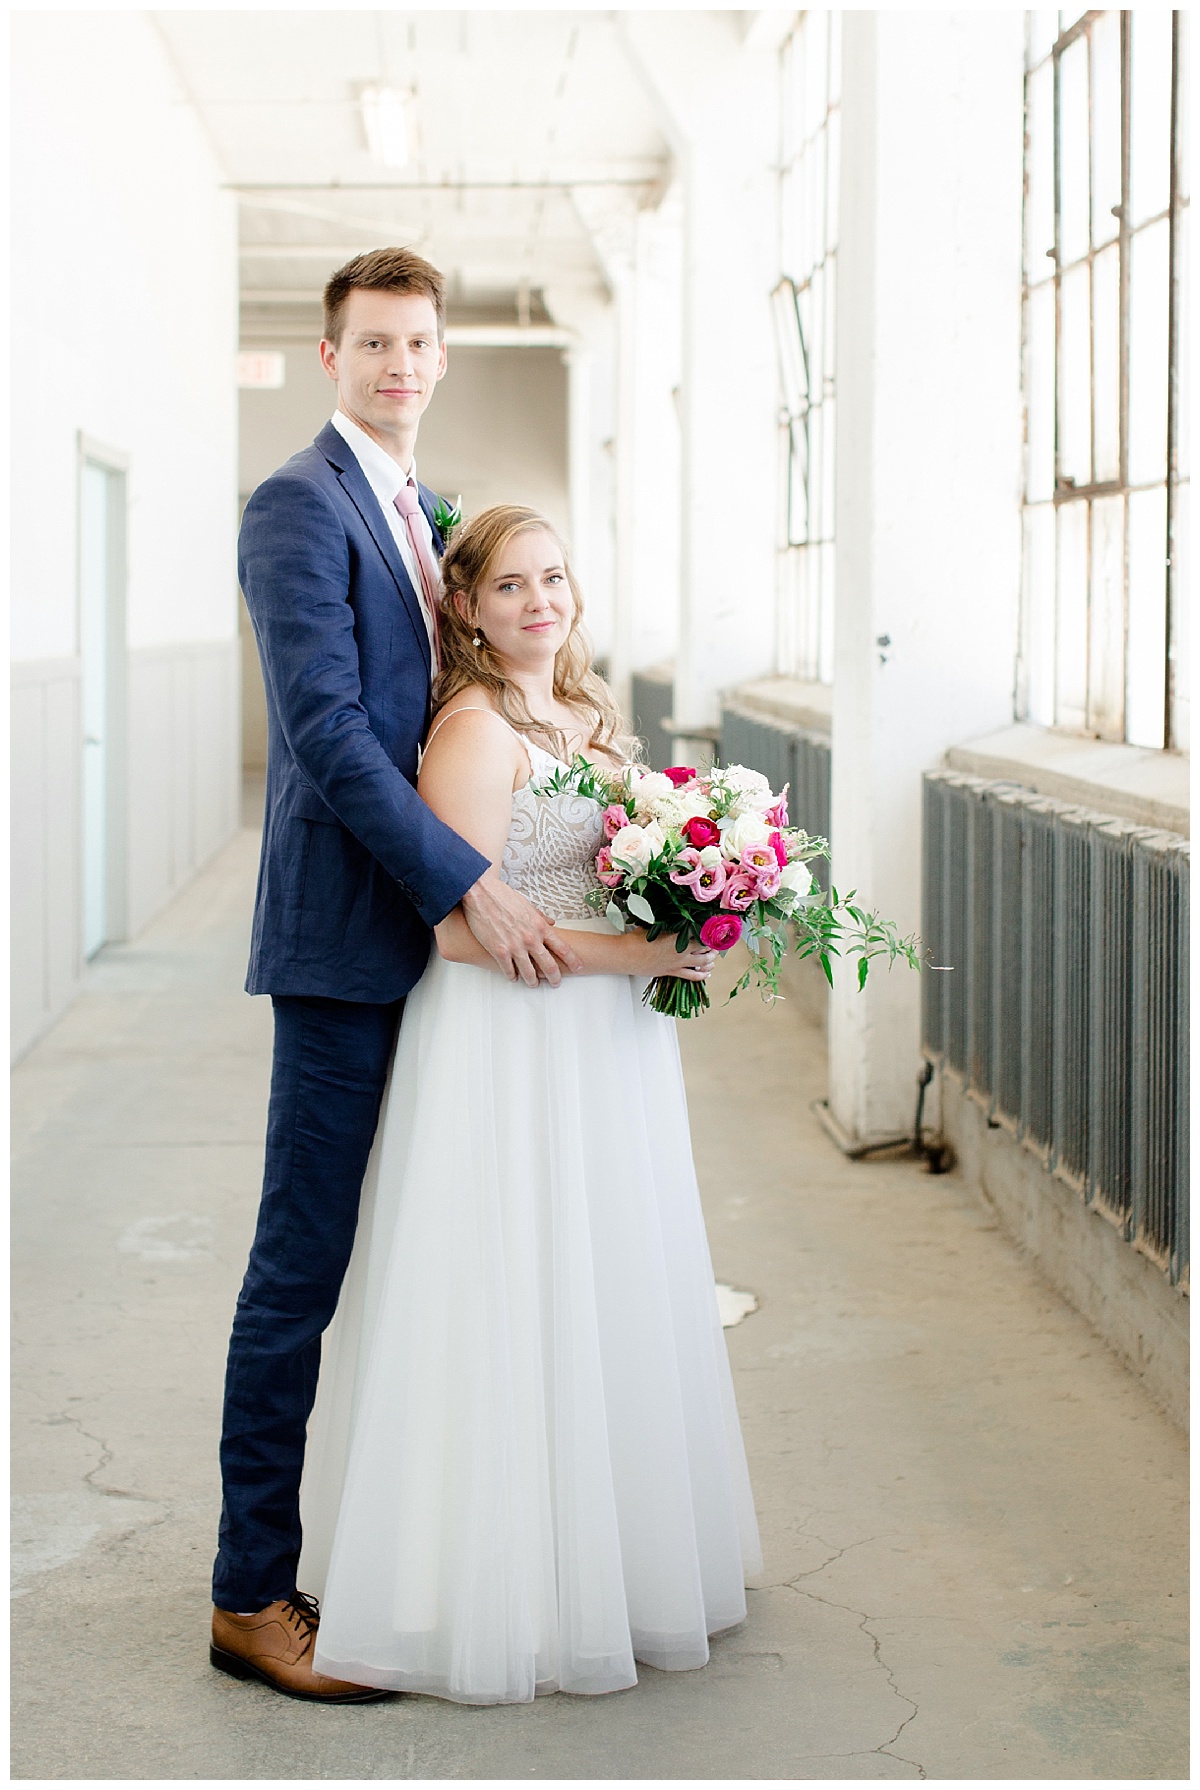 Lakewood_Lake_Erie_Building_Screw_Factory_Wedding_Cleveland_Jennings_Kate_Mannella_Photography_Industrial_Venue